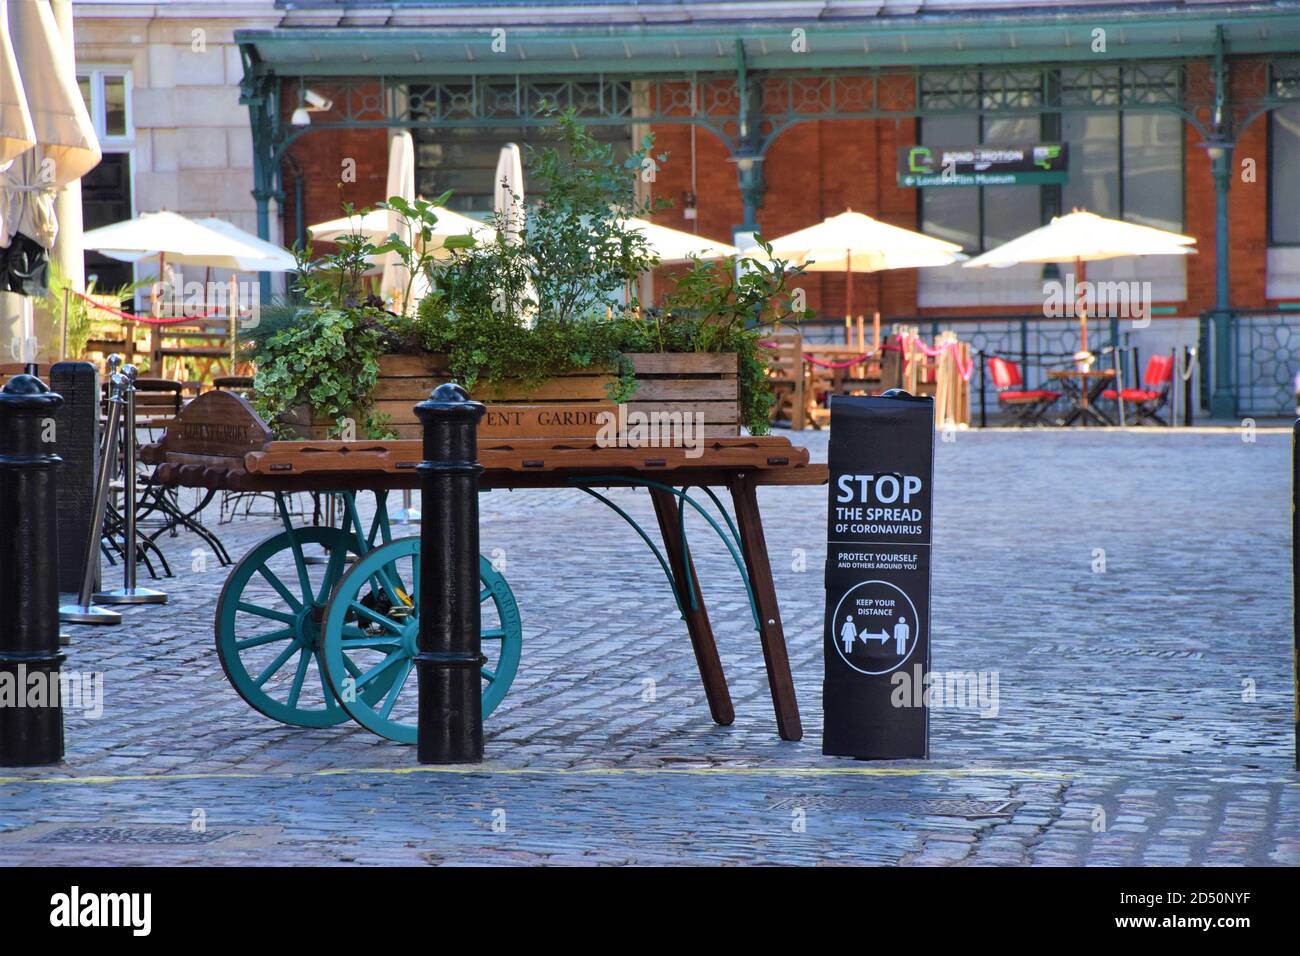 Stop The Spread Of Coronavirus social distancing street sign in Covent Garden, London Stock Photo